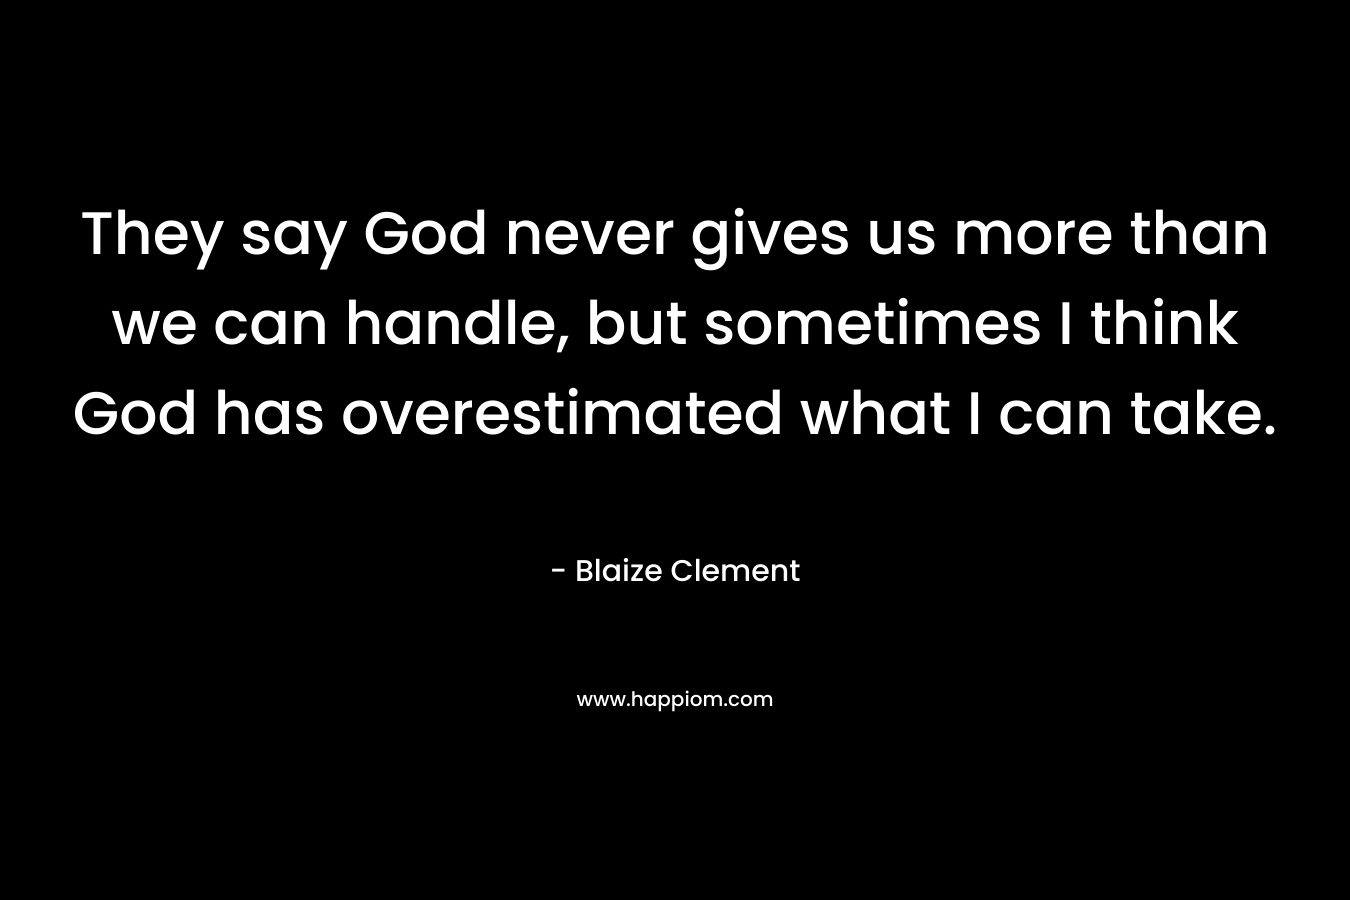 They say God never gives us more than we can handle, but sometimes I think God has overestimated what I can take. – Blaize Clement